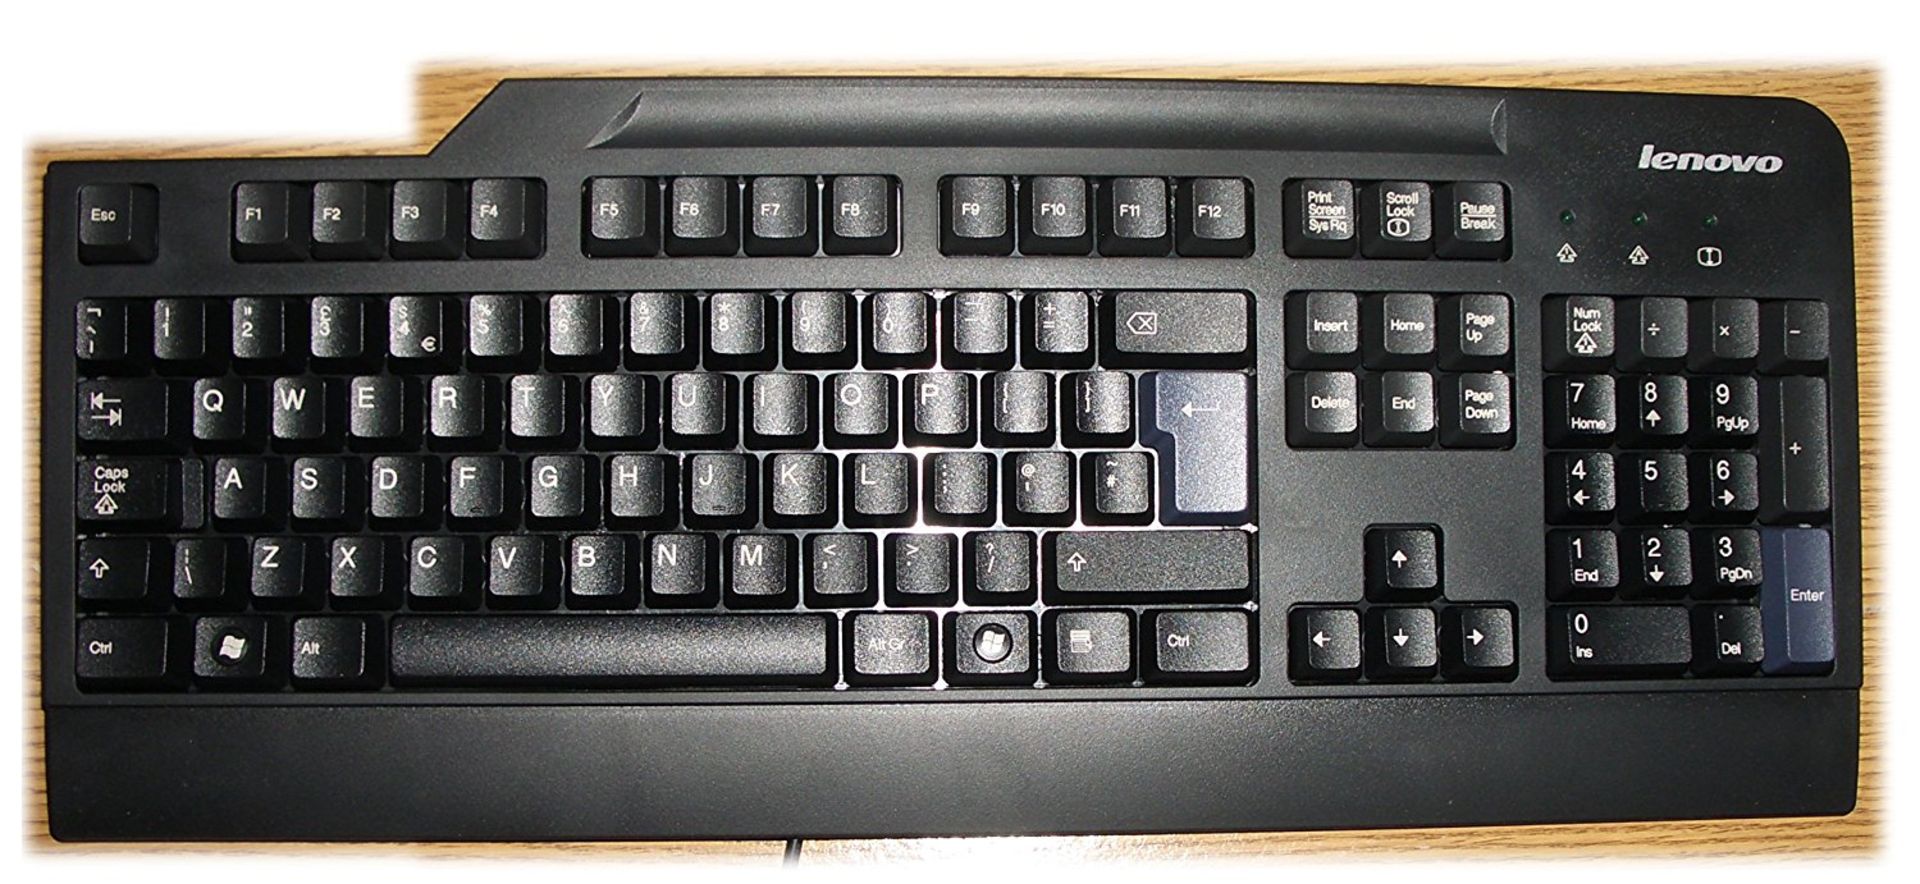 Lot of 40 Units-IBM Lenovo 41A5075 89P8300UK Business Black English PS2 Preferred Pro Keyboard in